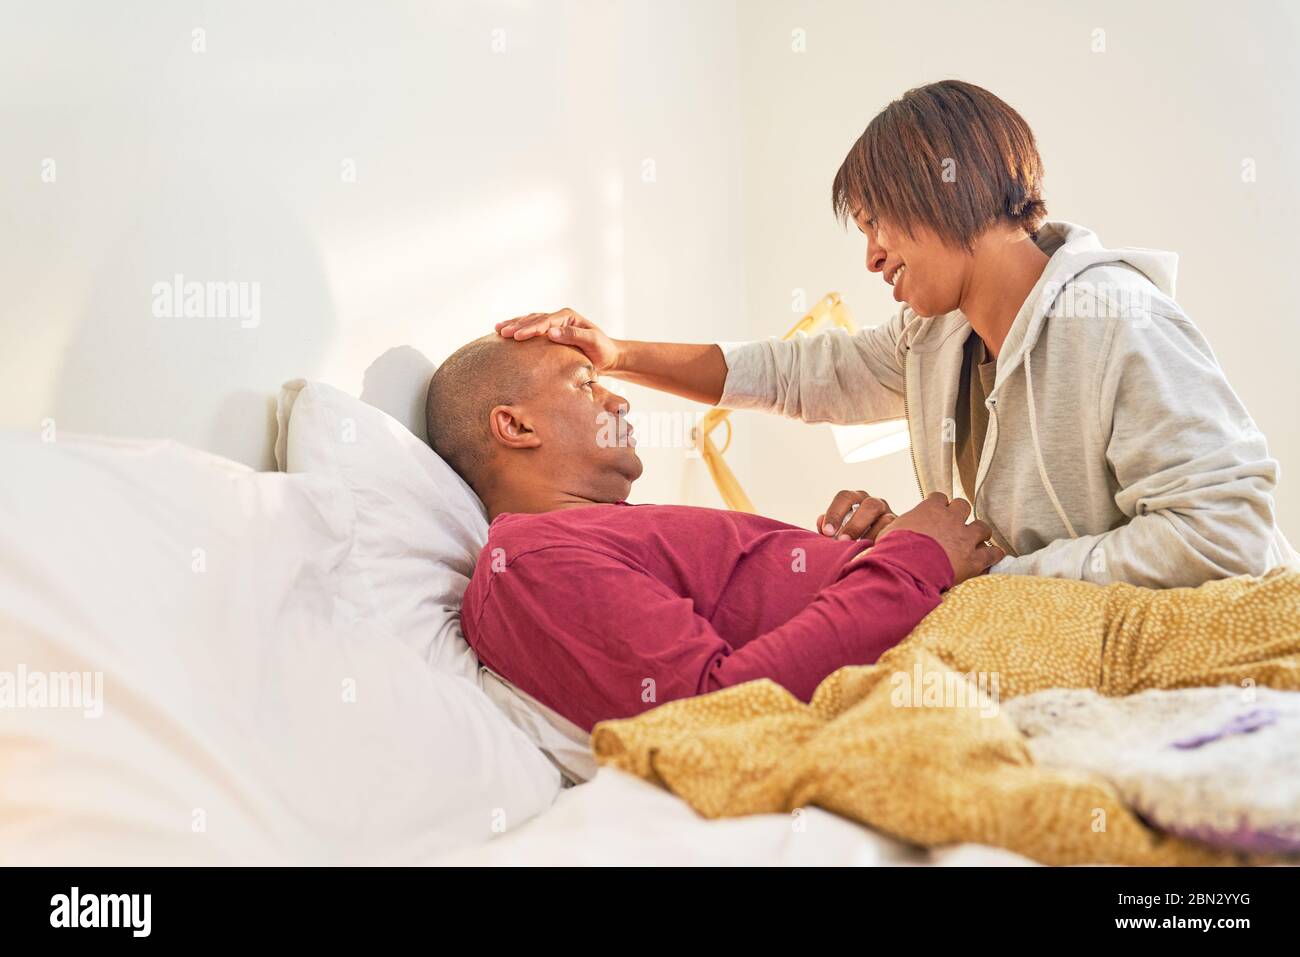 Affectionate wife checking fever of sick husband in bed Stock Photo